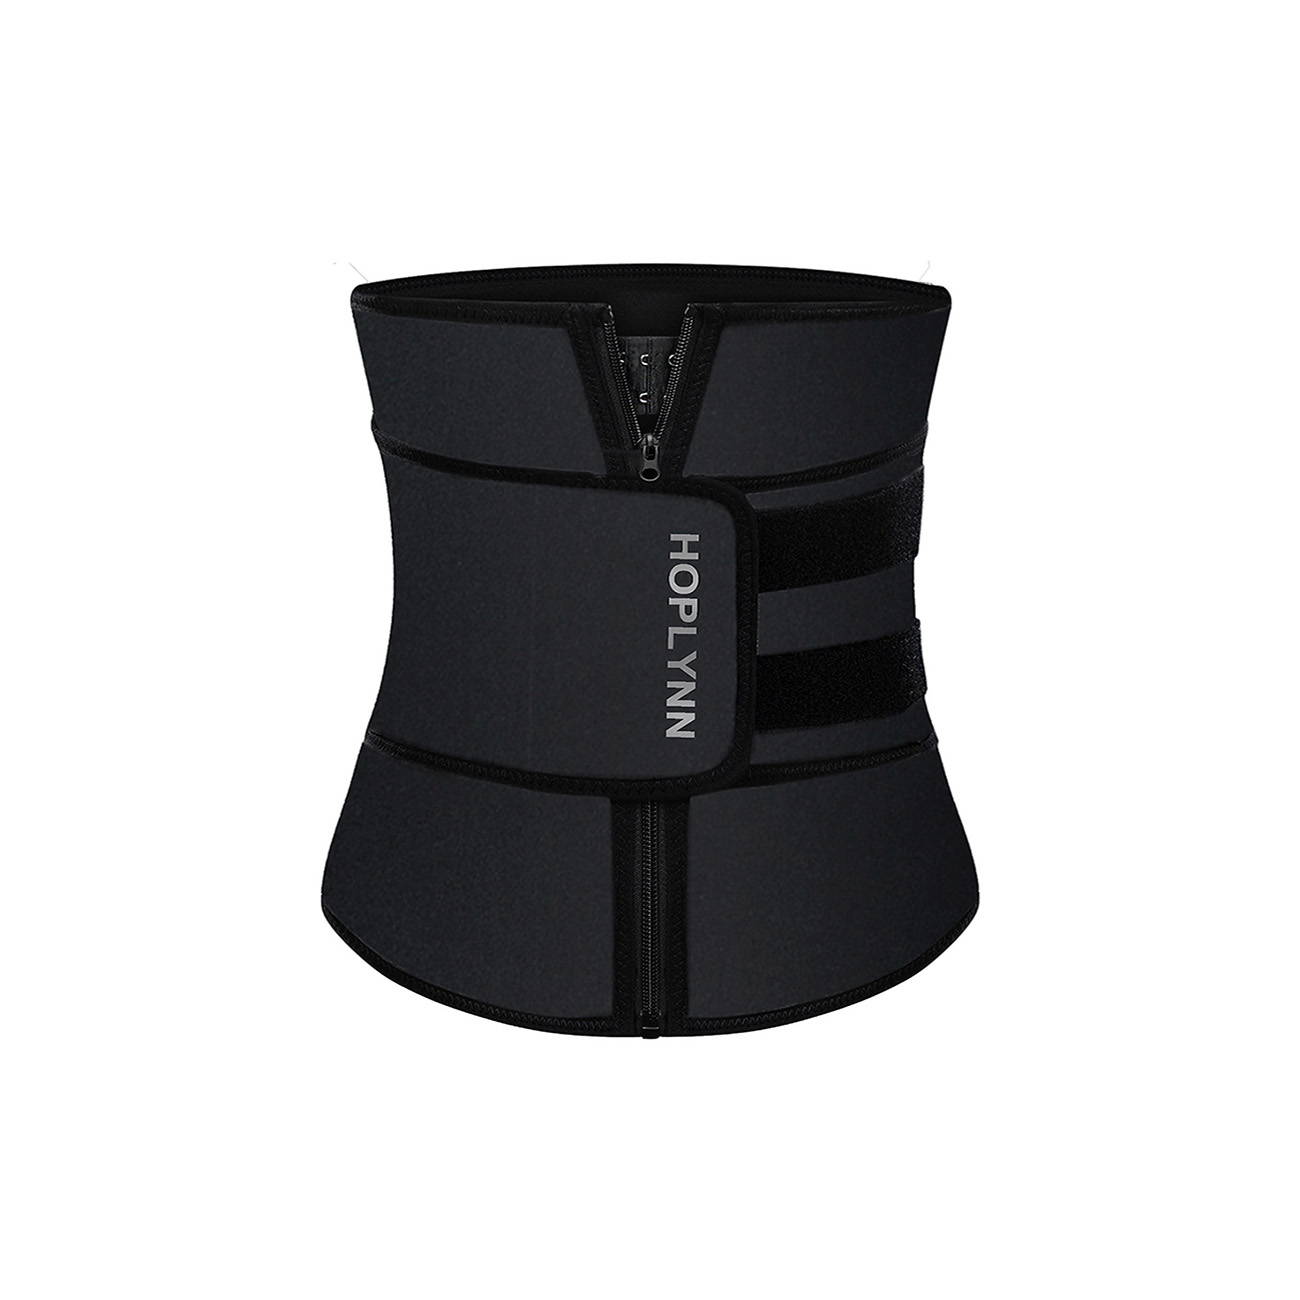 Shape Your Waist Instantly with * Neoprene Sweat Waist Trainer Corset  Trimmer Belt - For Women